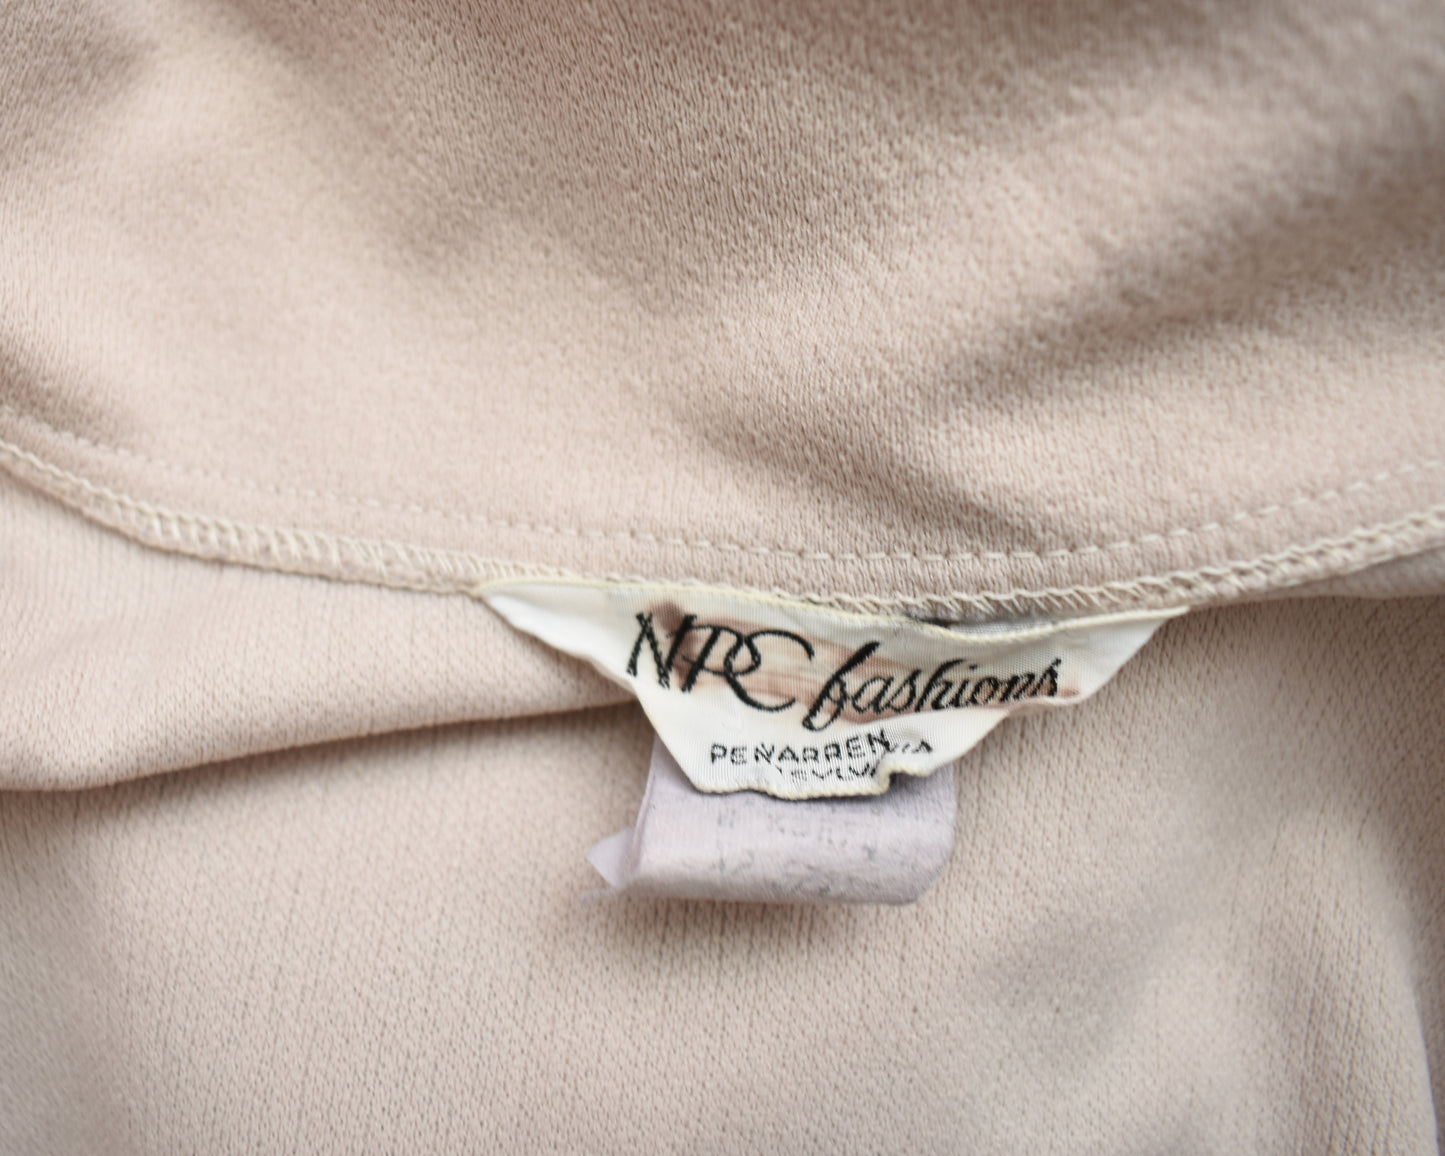 Close up of the tag which says NPC fashions